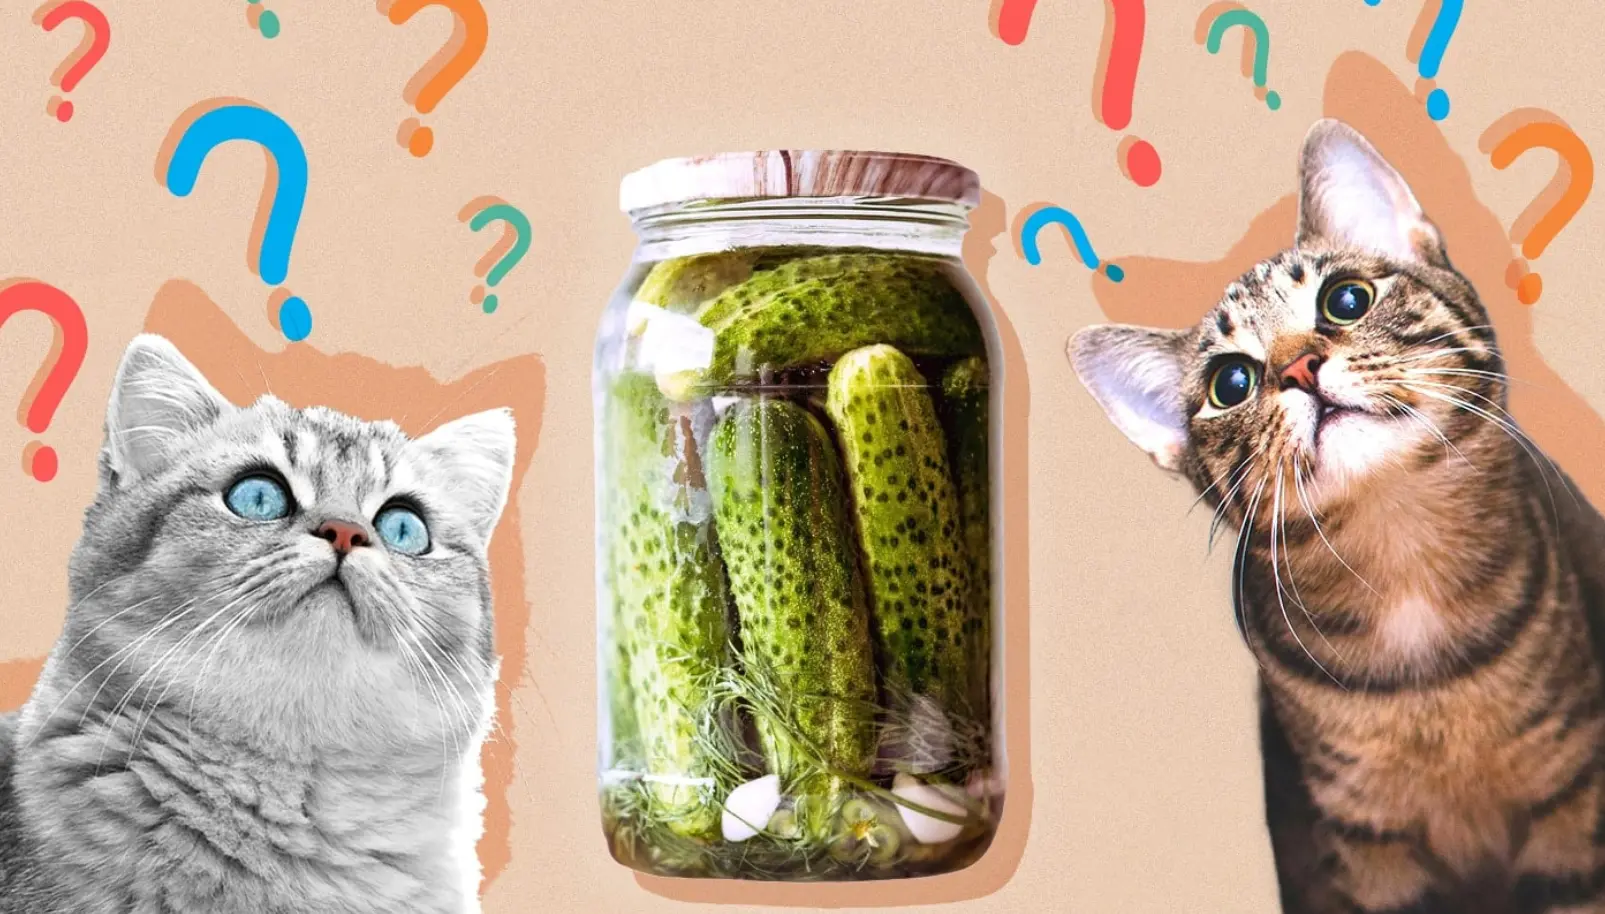 Can cats eat pickles?